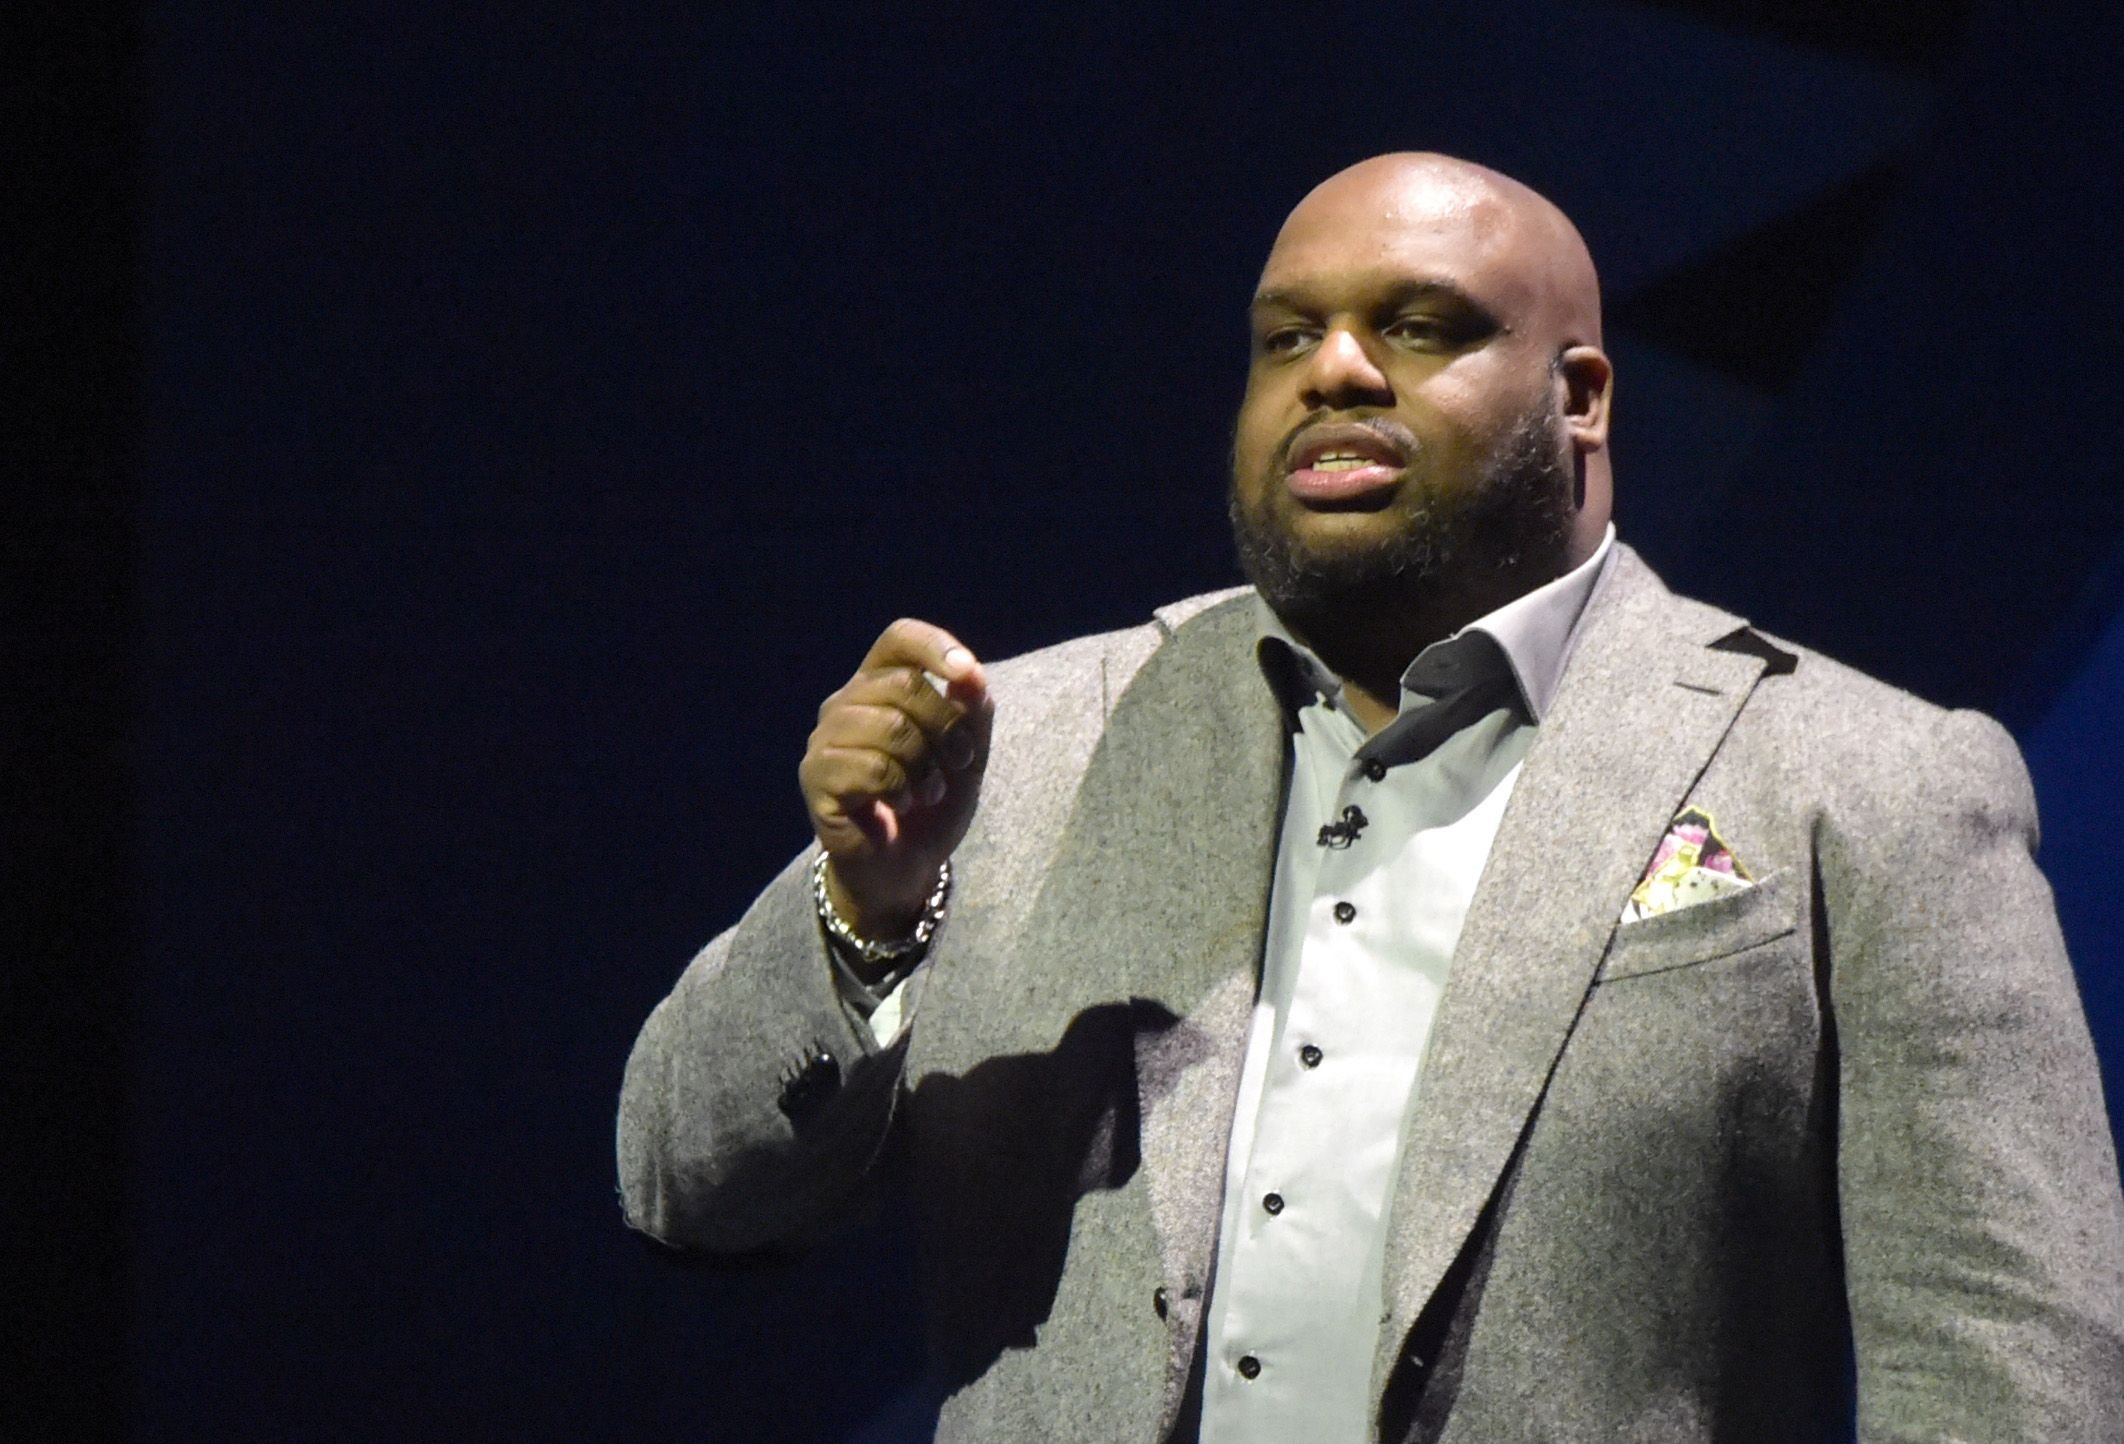 Pastor John Gray during BET Presents Super Bowl Gospel Celebration at Lakewood Church on February 3, 2017 in Houston, Texas. | Source: Getty Images